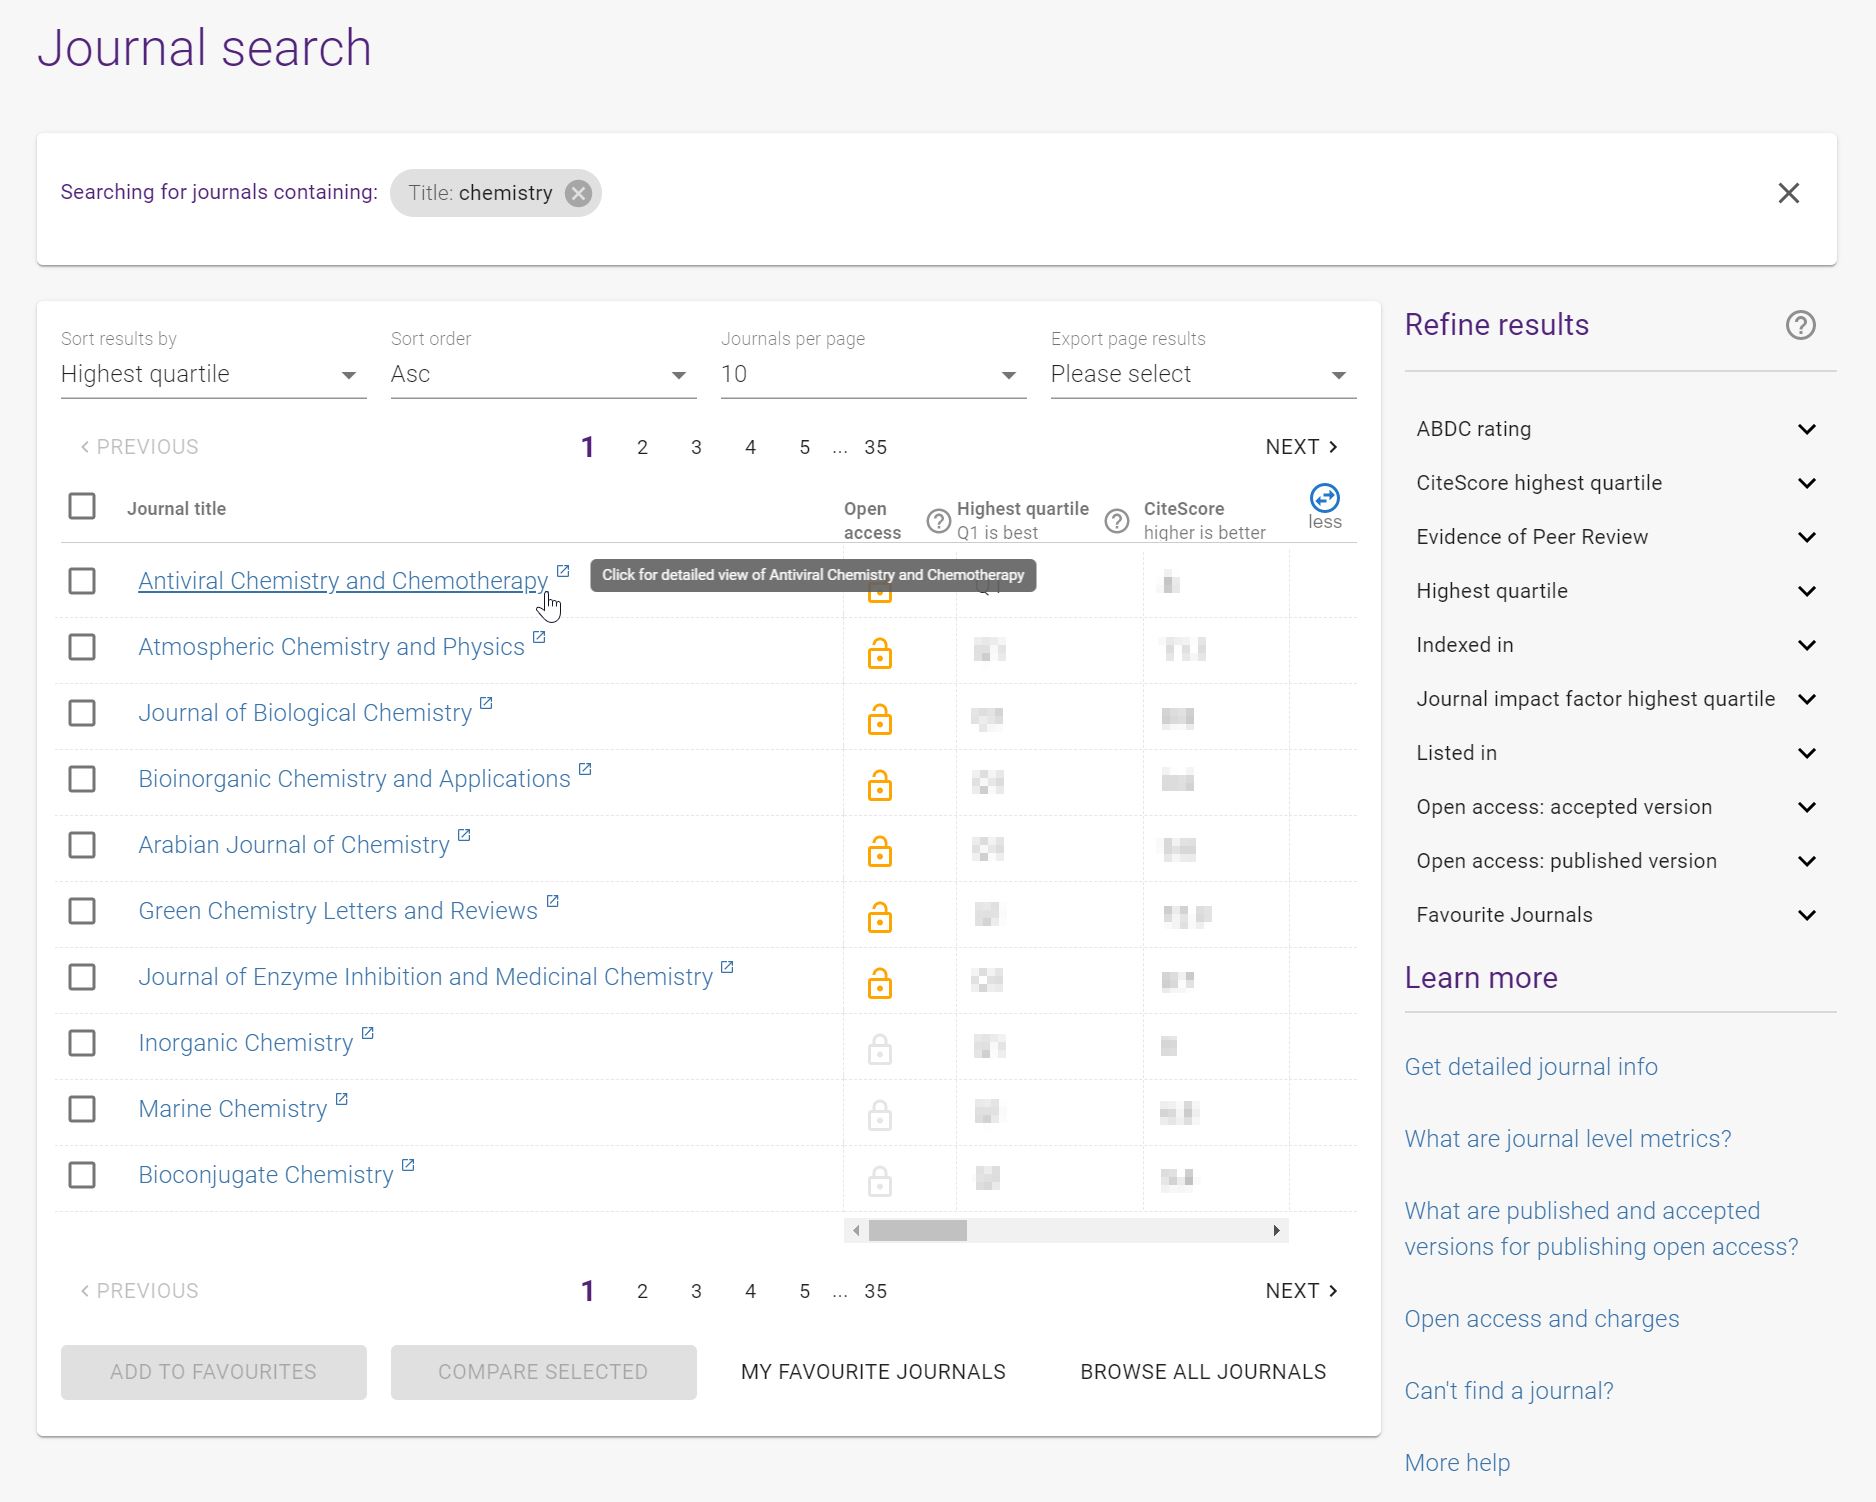 Journal search - results screen. List of journal titles based on your search with table of metrics for comparison.